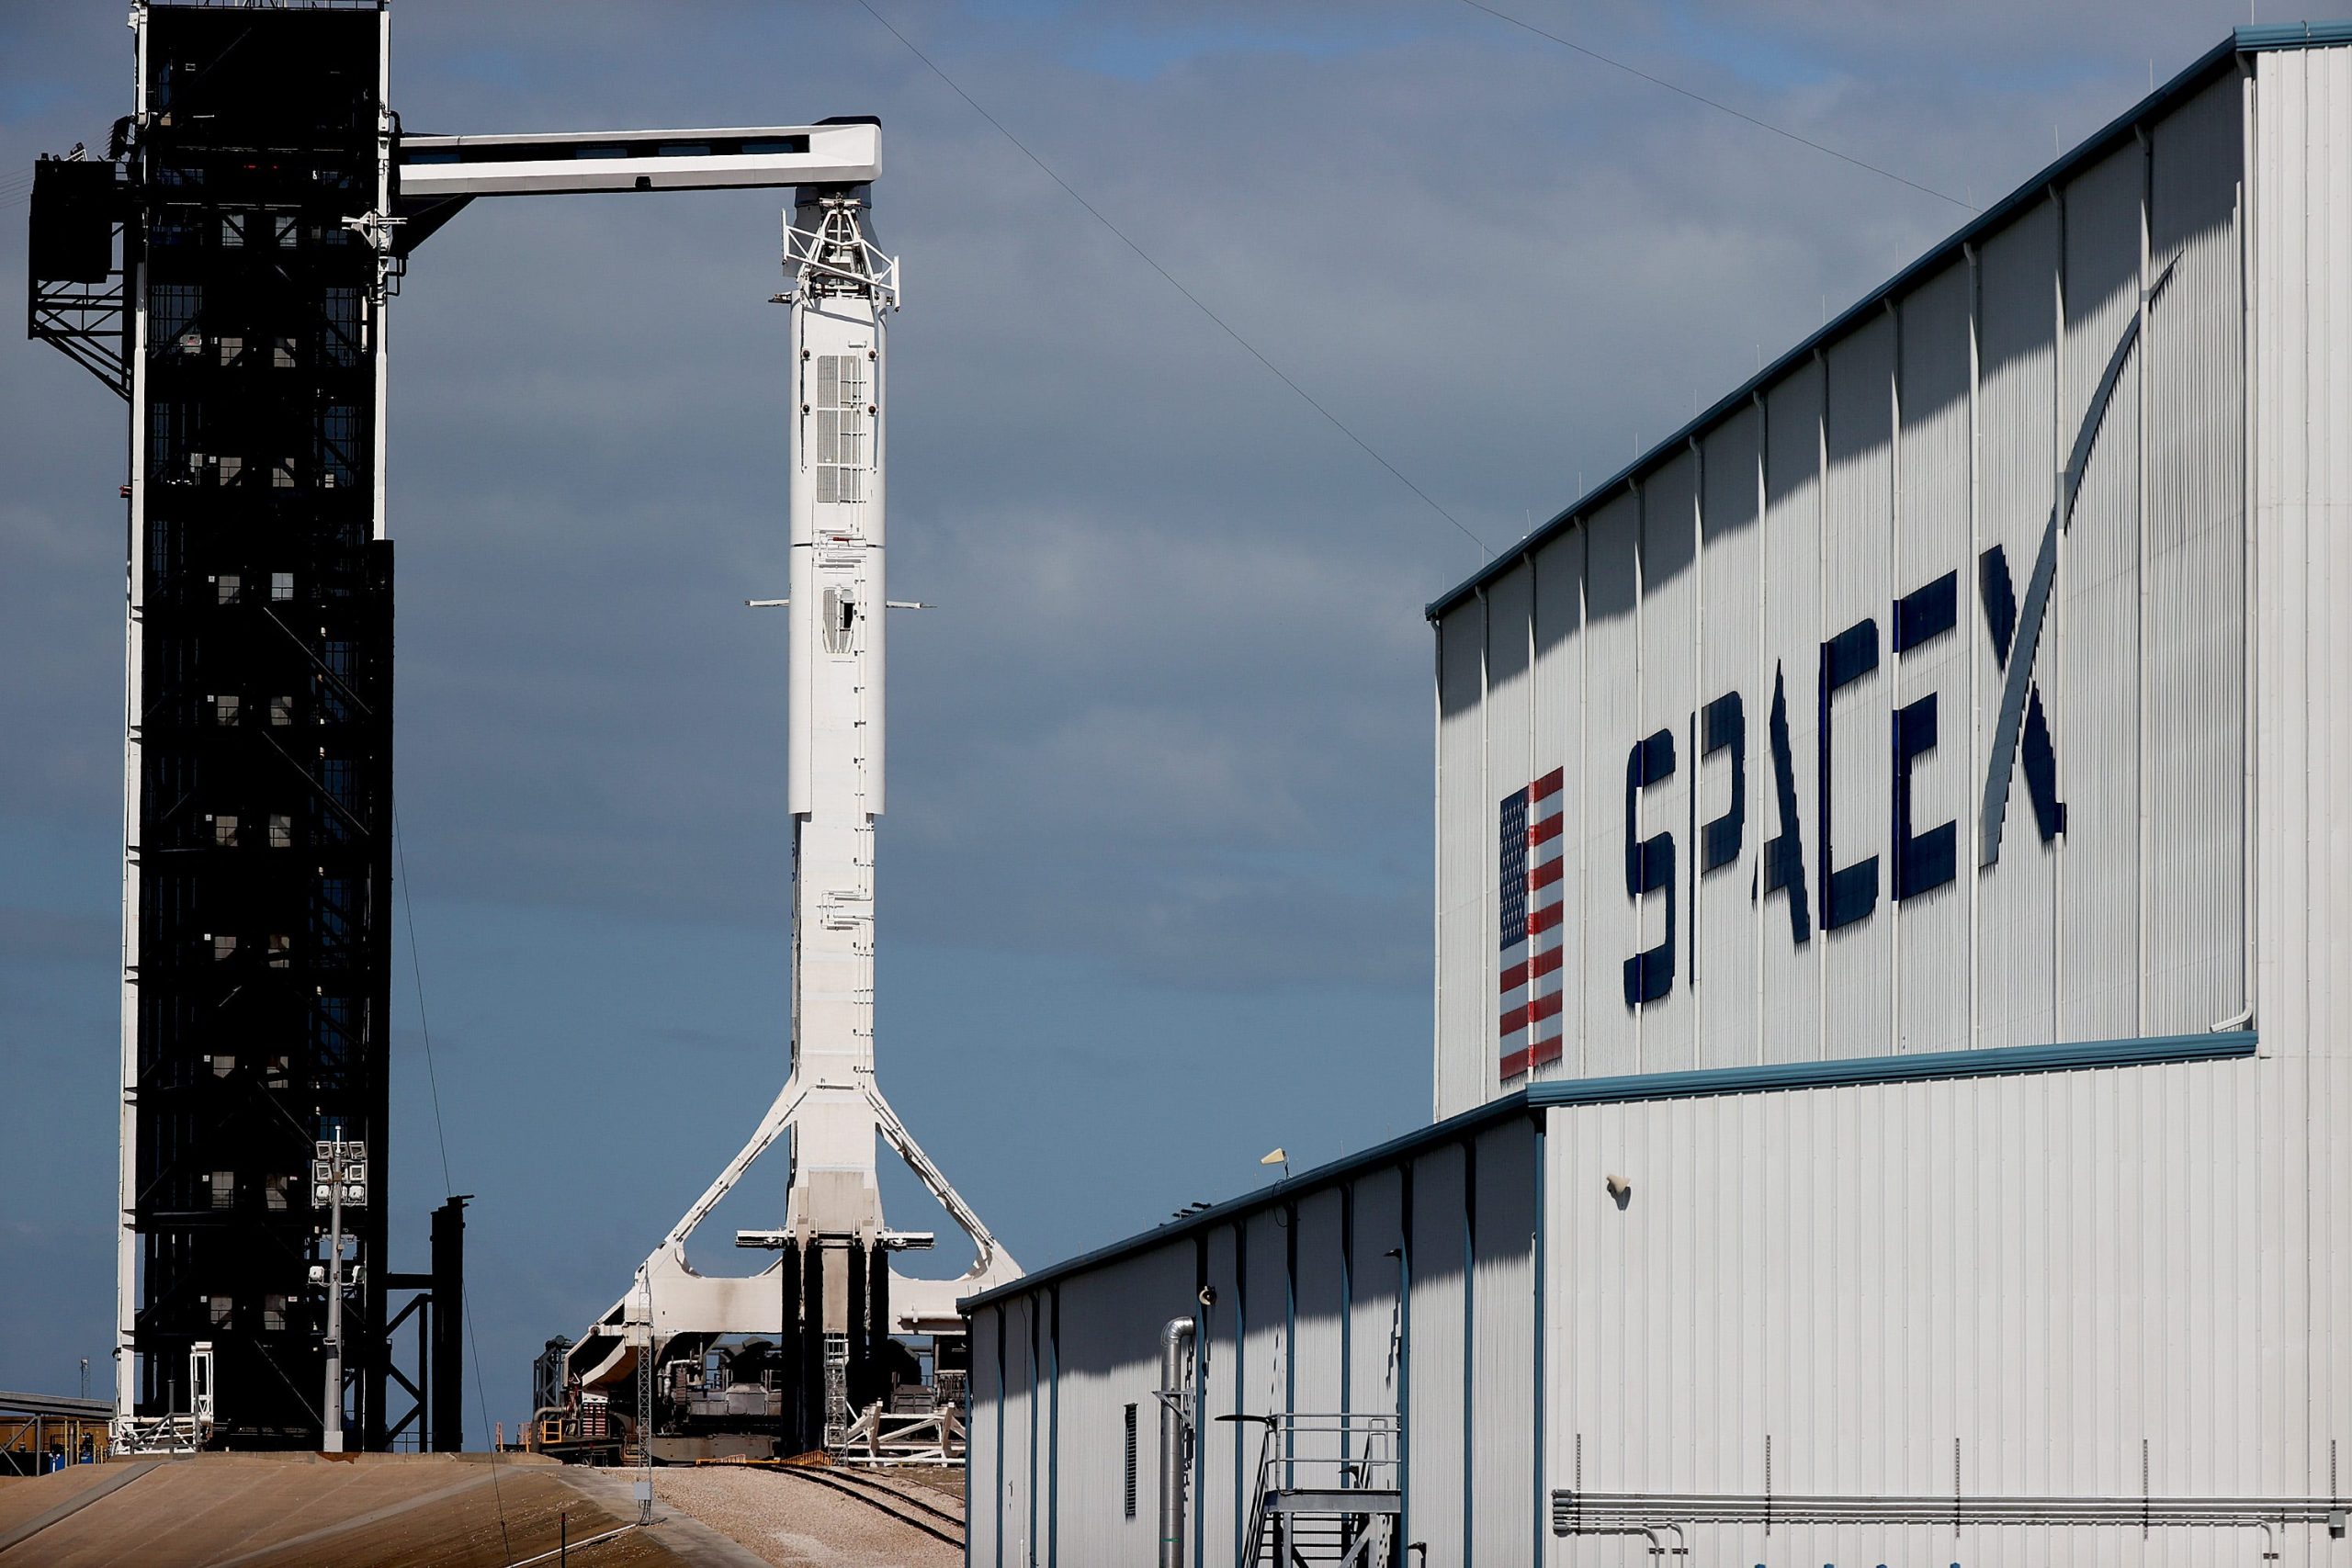 The SpaceX Falcon 9 rocket and Crew Dragon capsule on the launch pad in Florida.